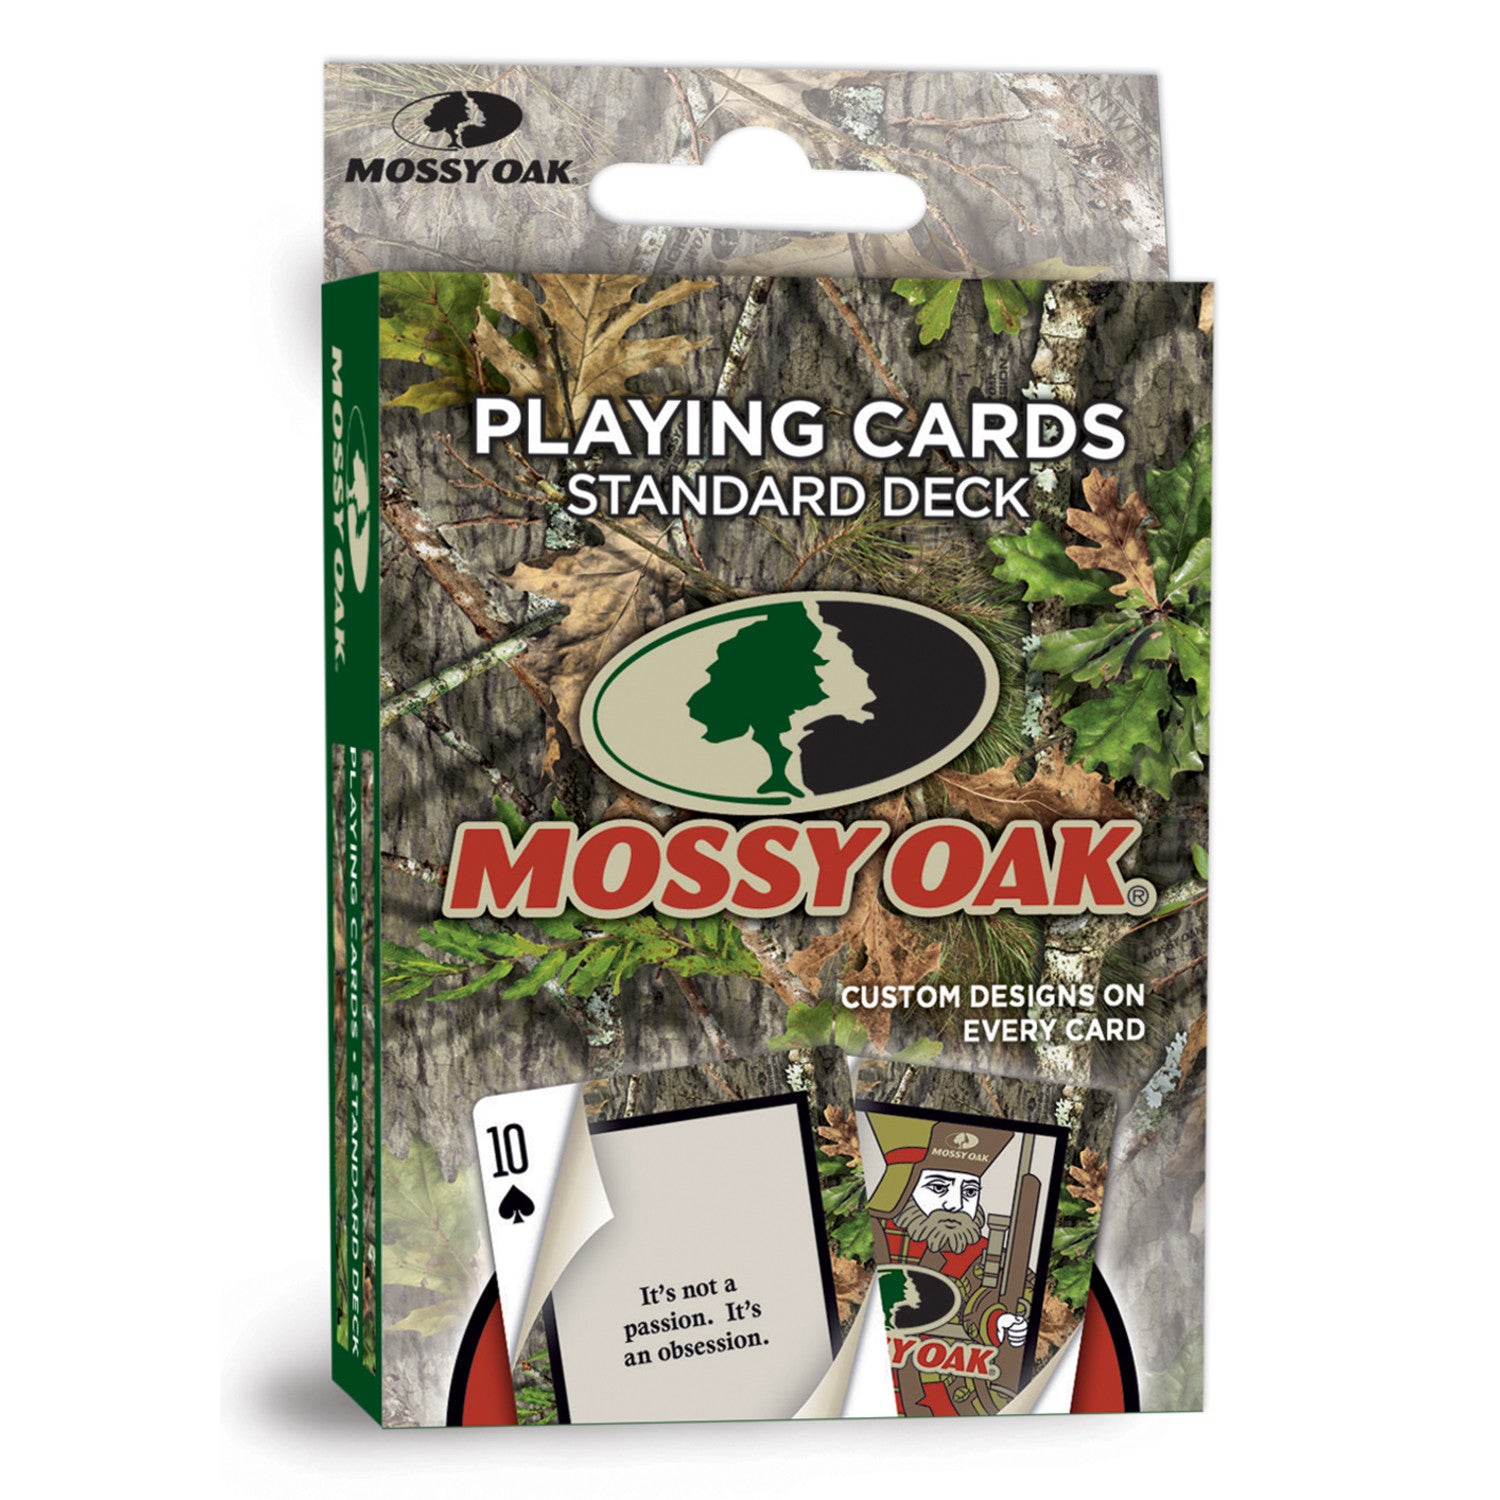 Mossy Oak Playing Cards